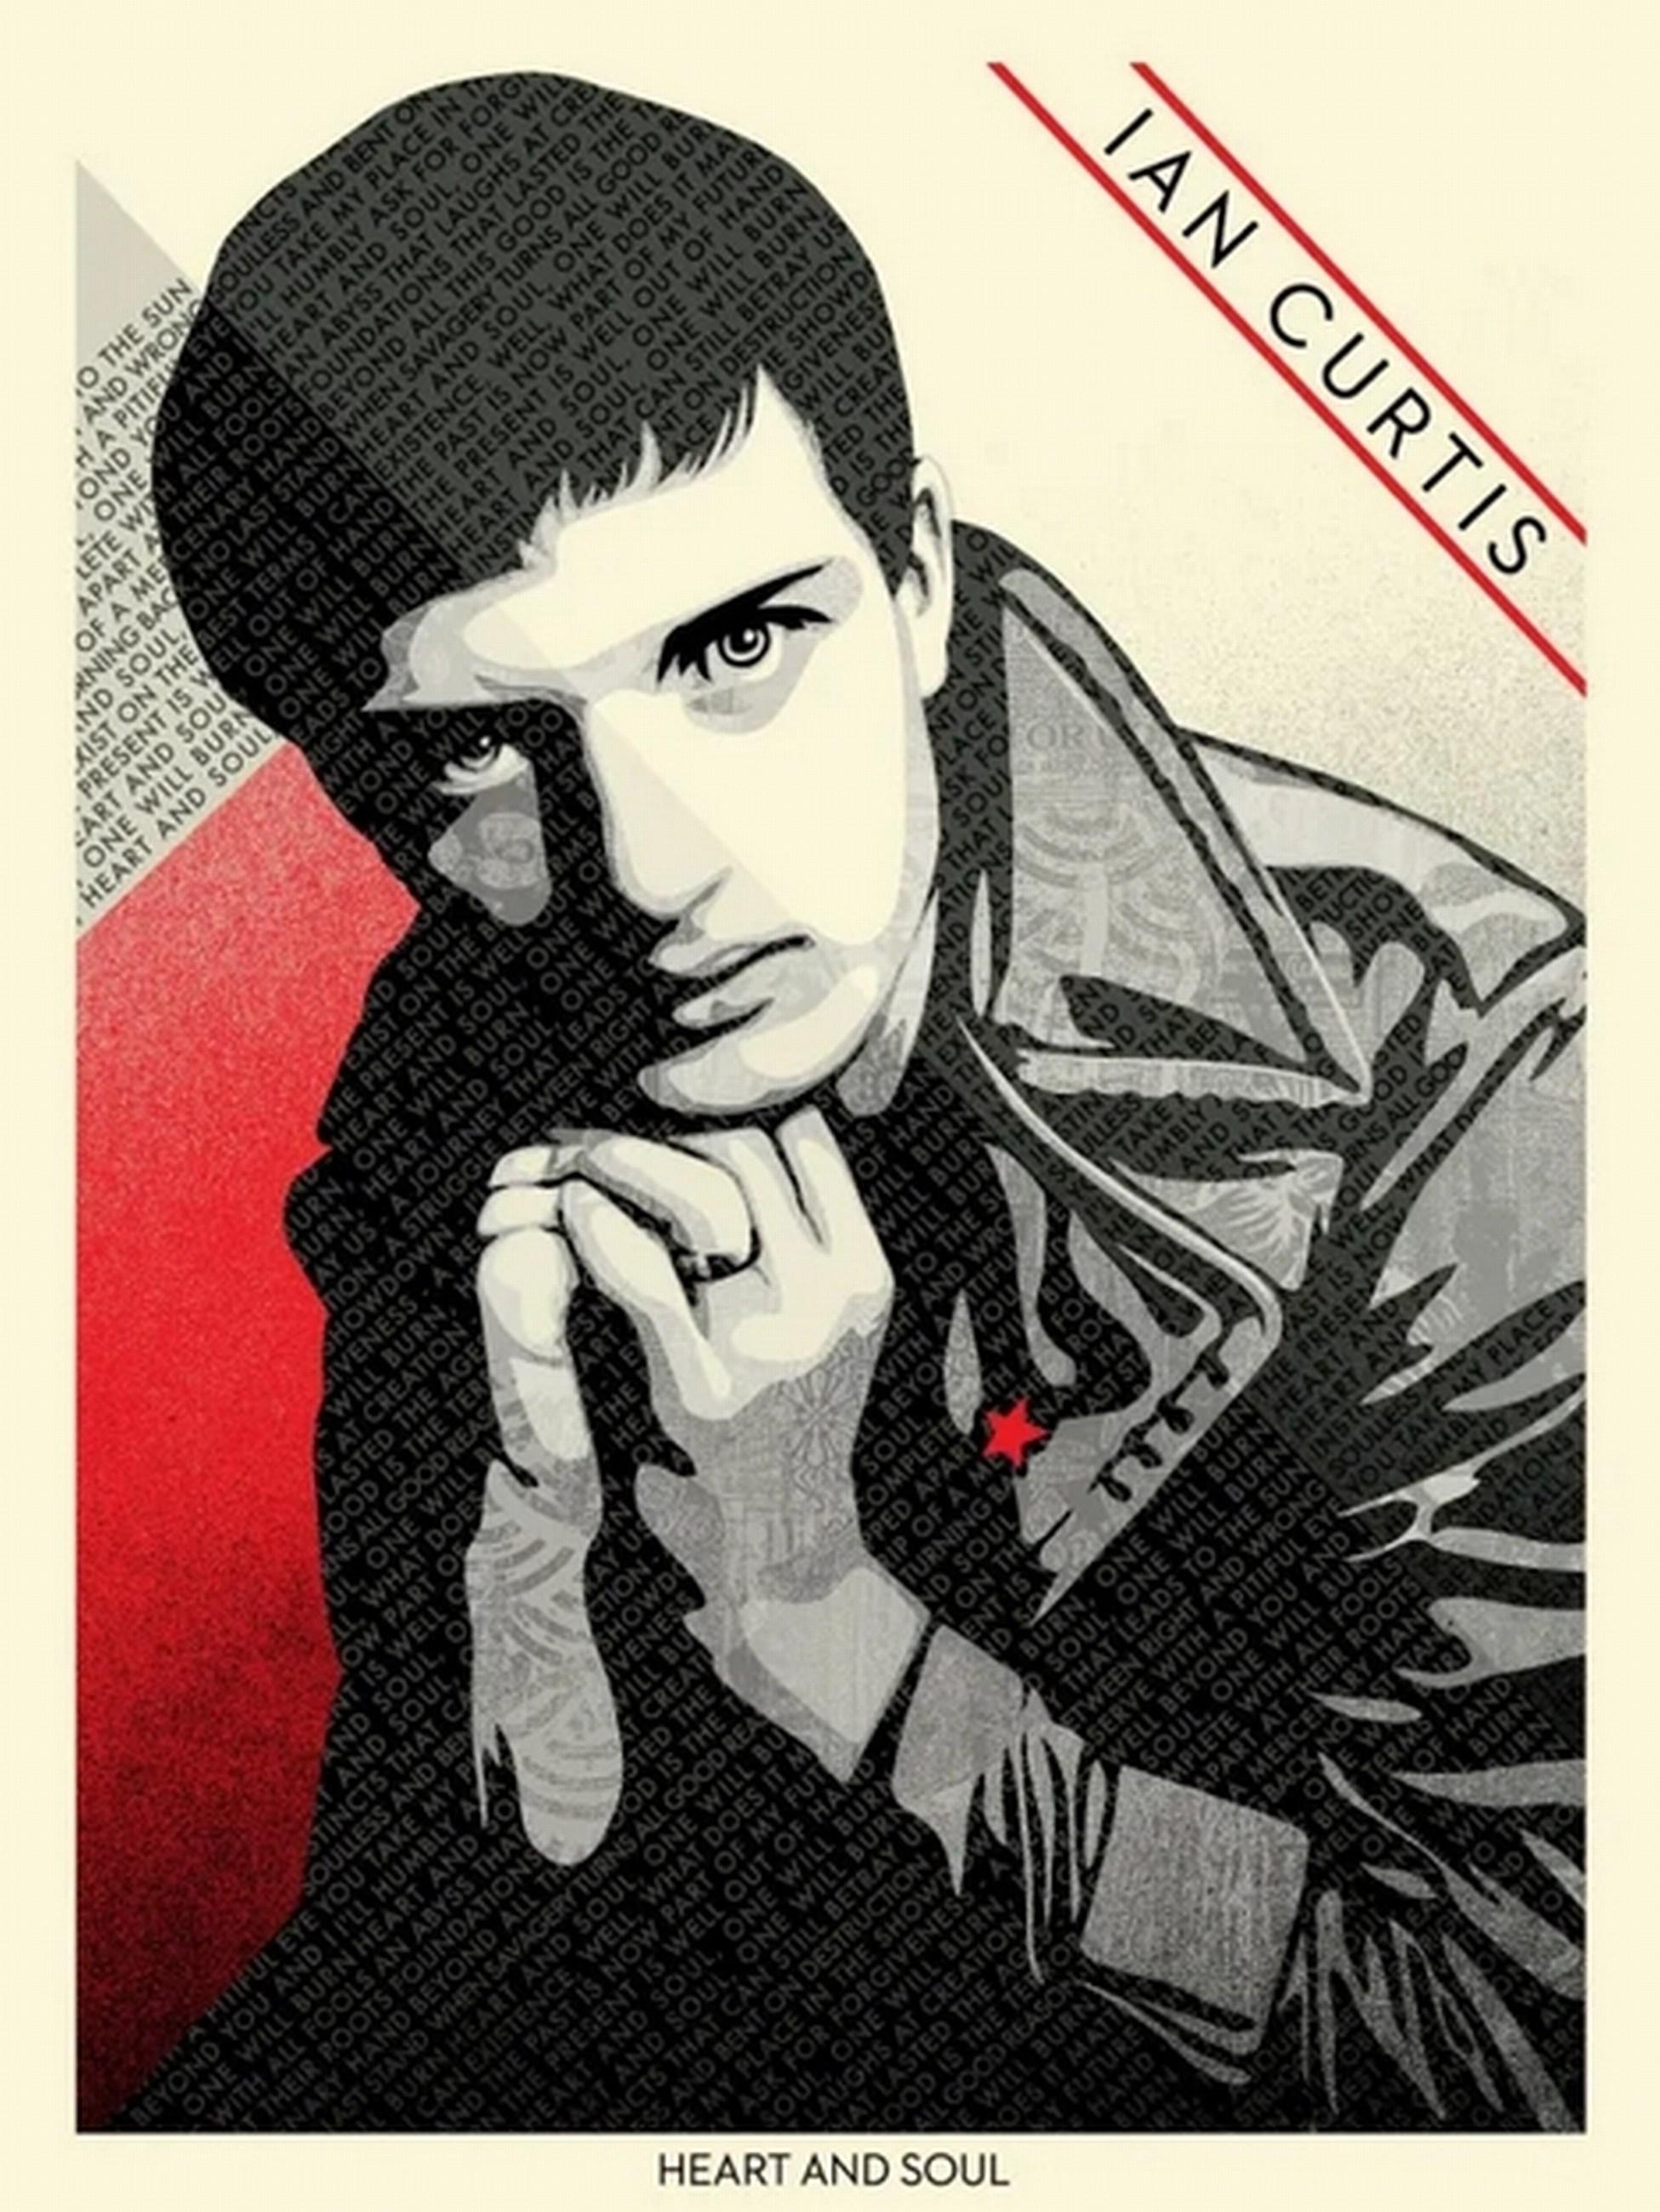 Ian Curtis Heart And Soul (Iconic, Joy Division, Peter Saville, Kevin Cummins) - Print by Shepard Fairey